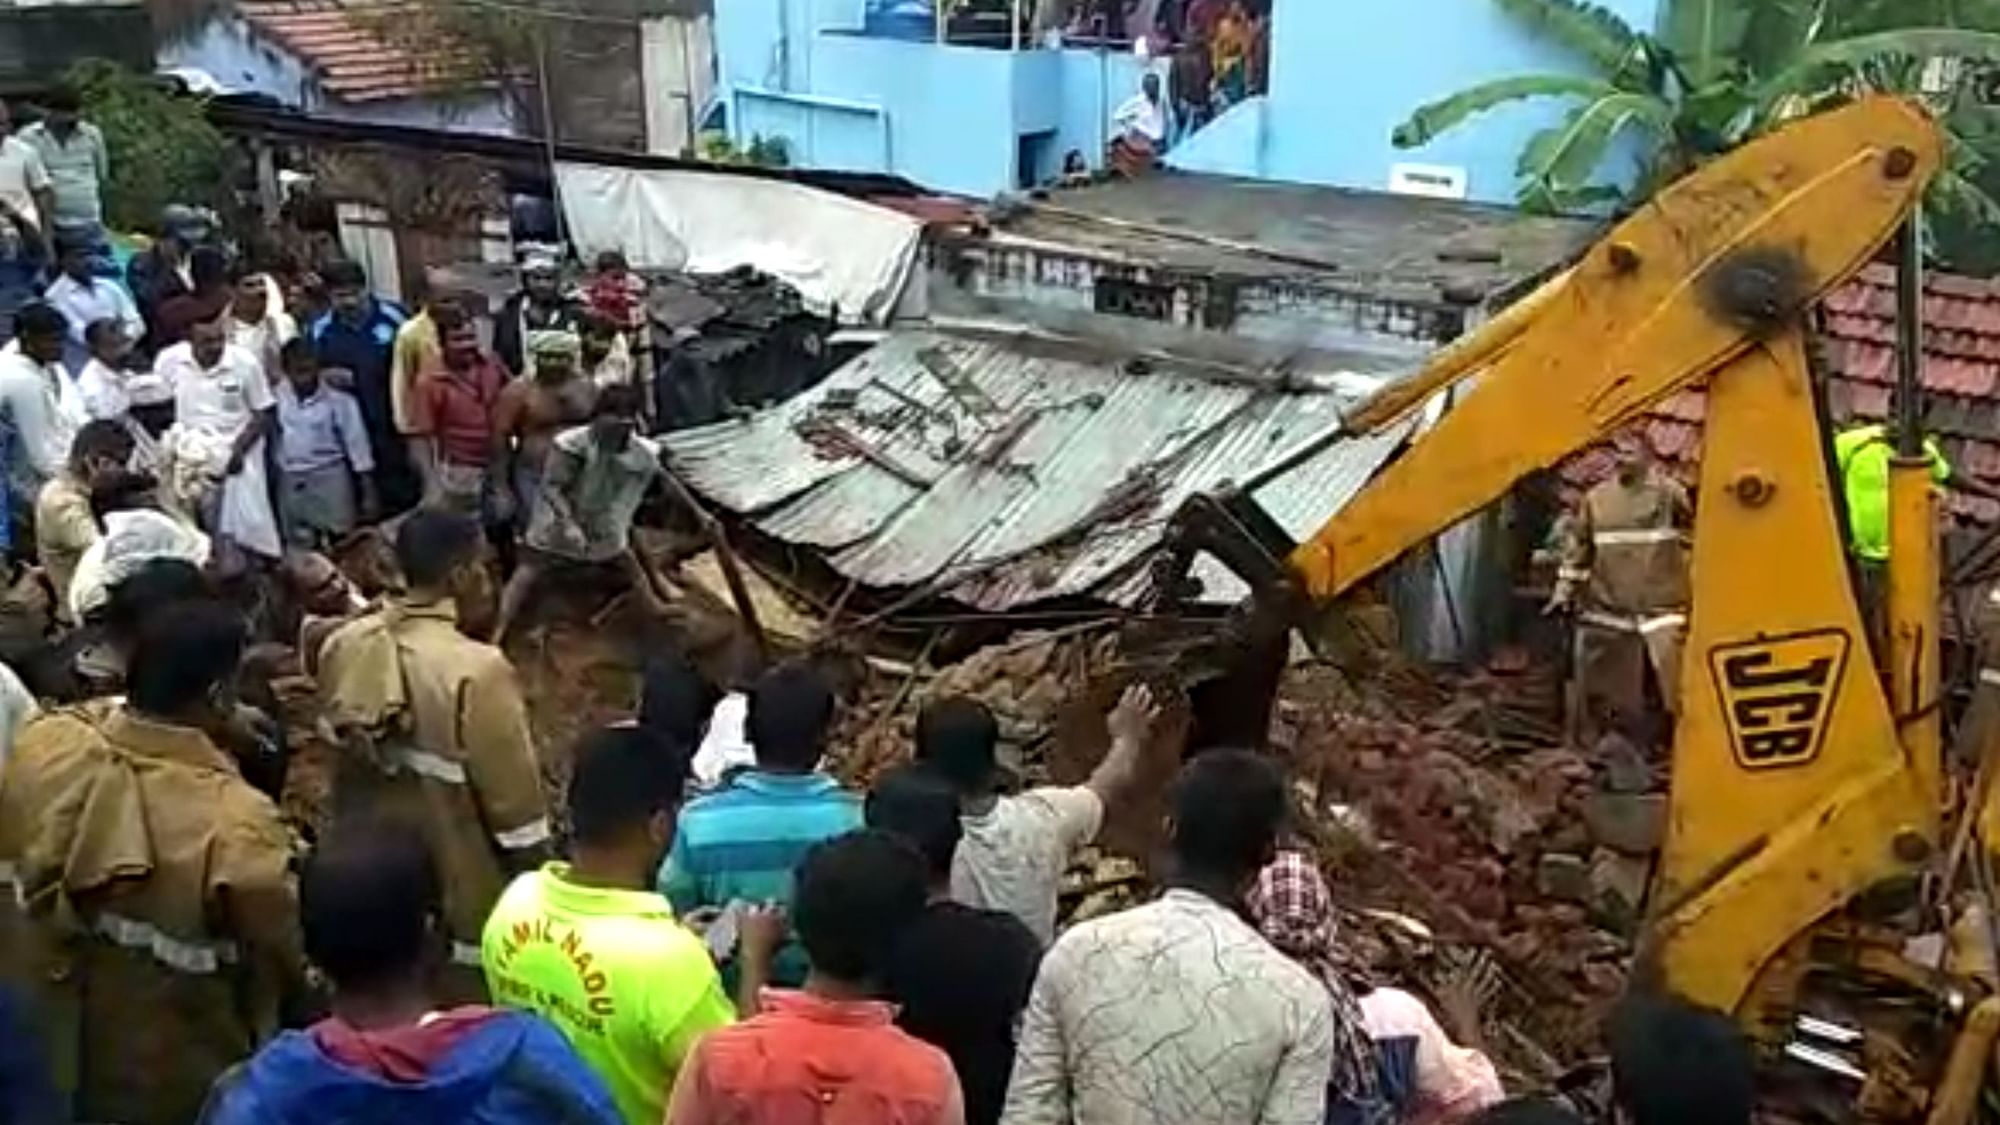 17 people were killed after a wall collapsed in a village in Coimbatore in Tamil Nadu